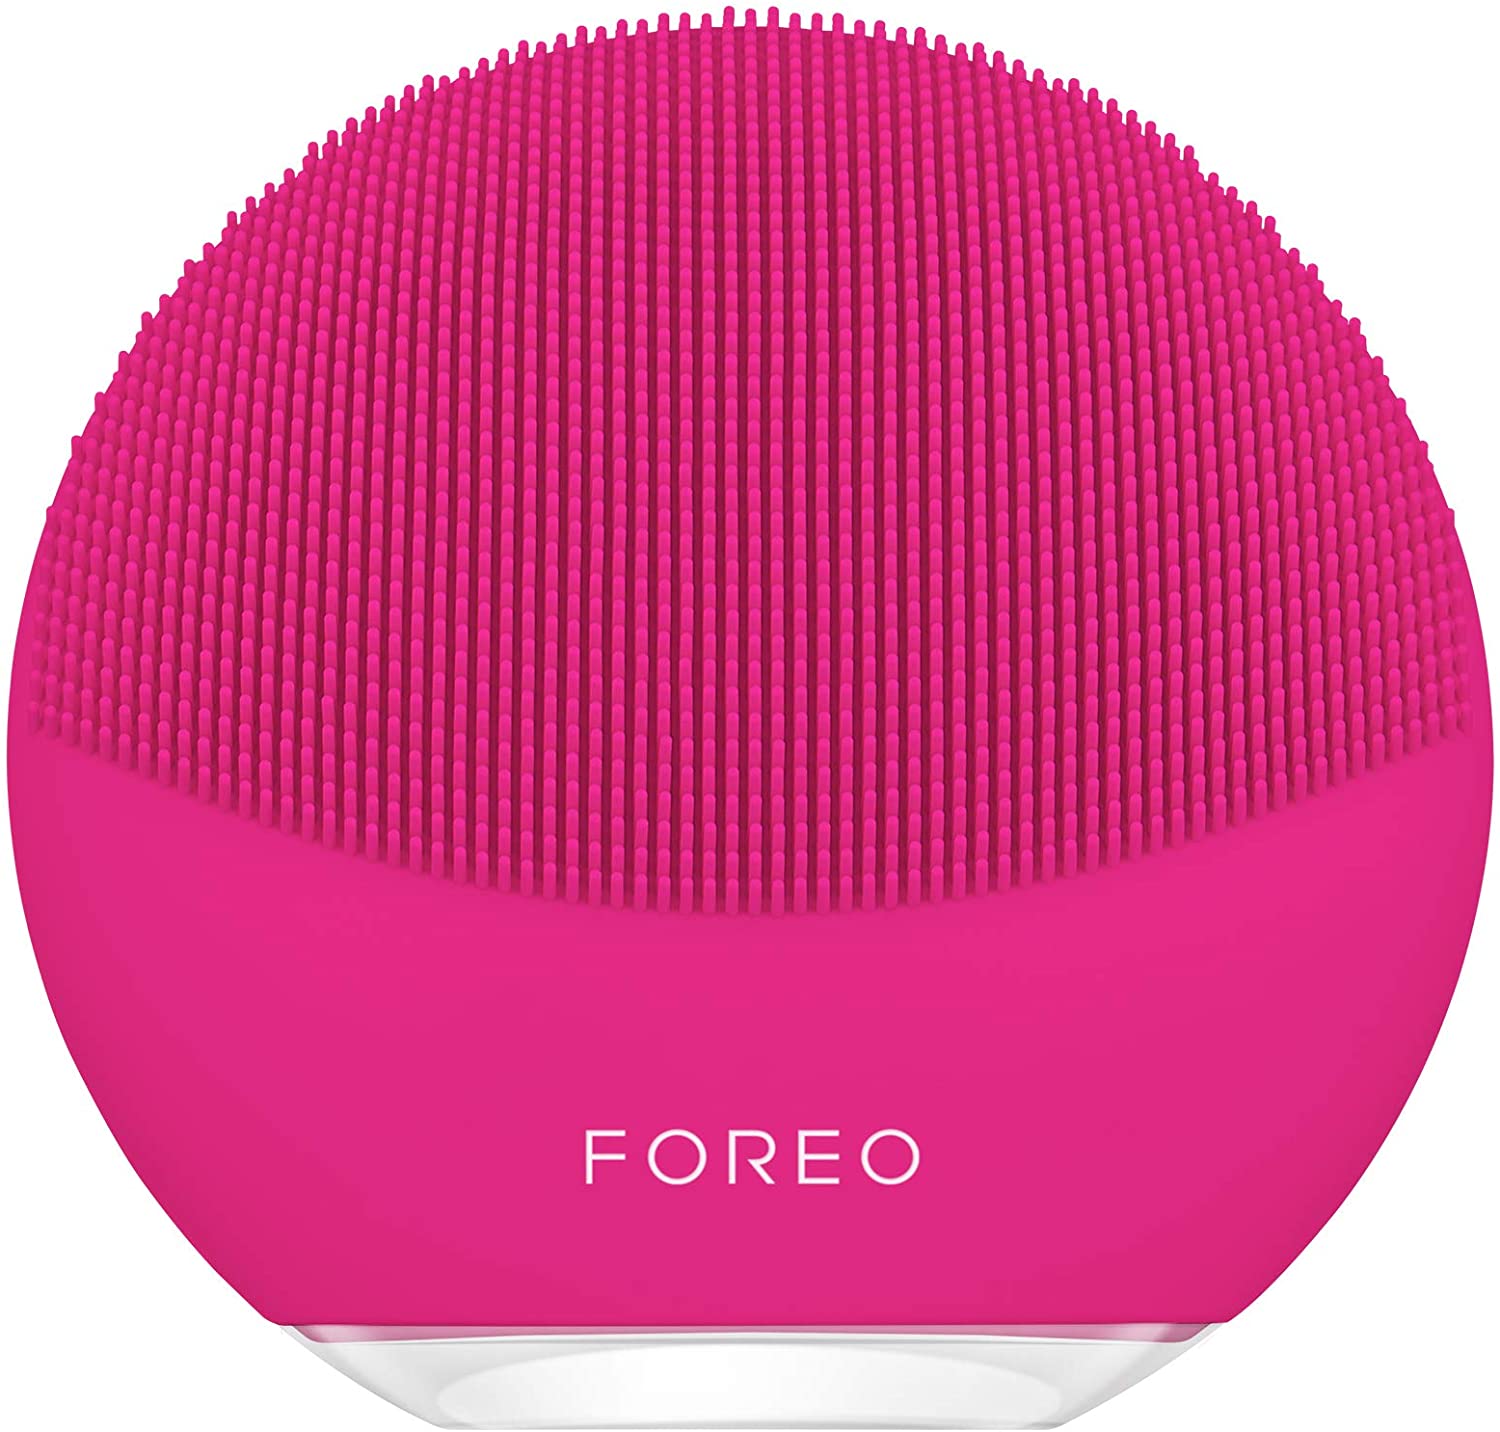 FOREO LUNA mini 3 Smart Electric Face Cleanser for All Skin Types Midnight